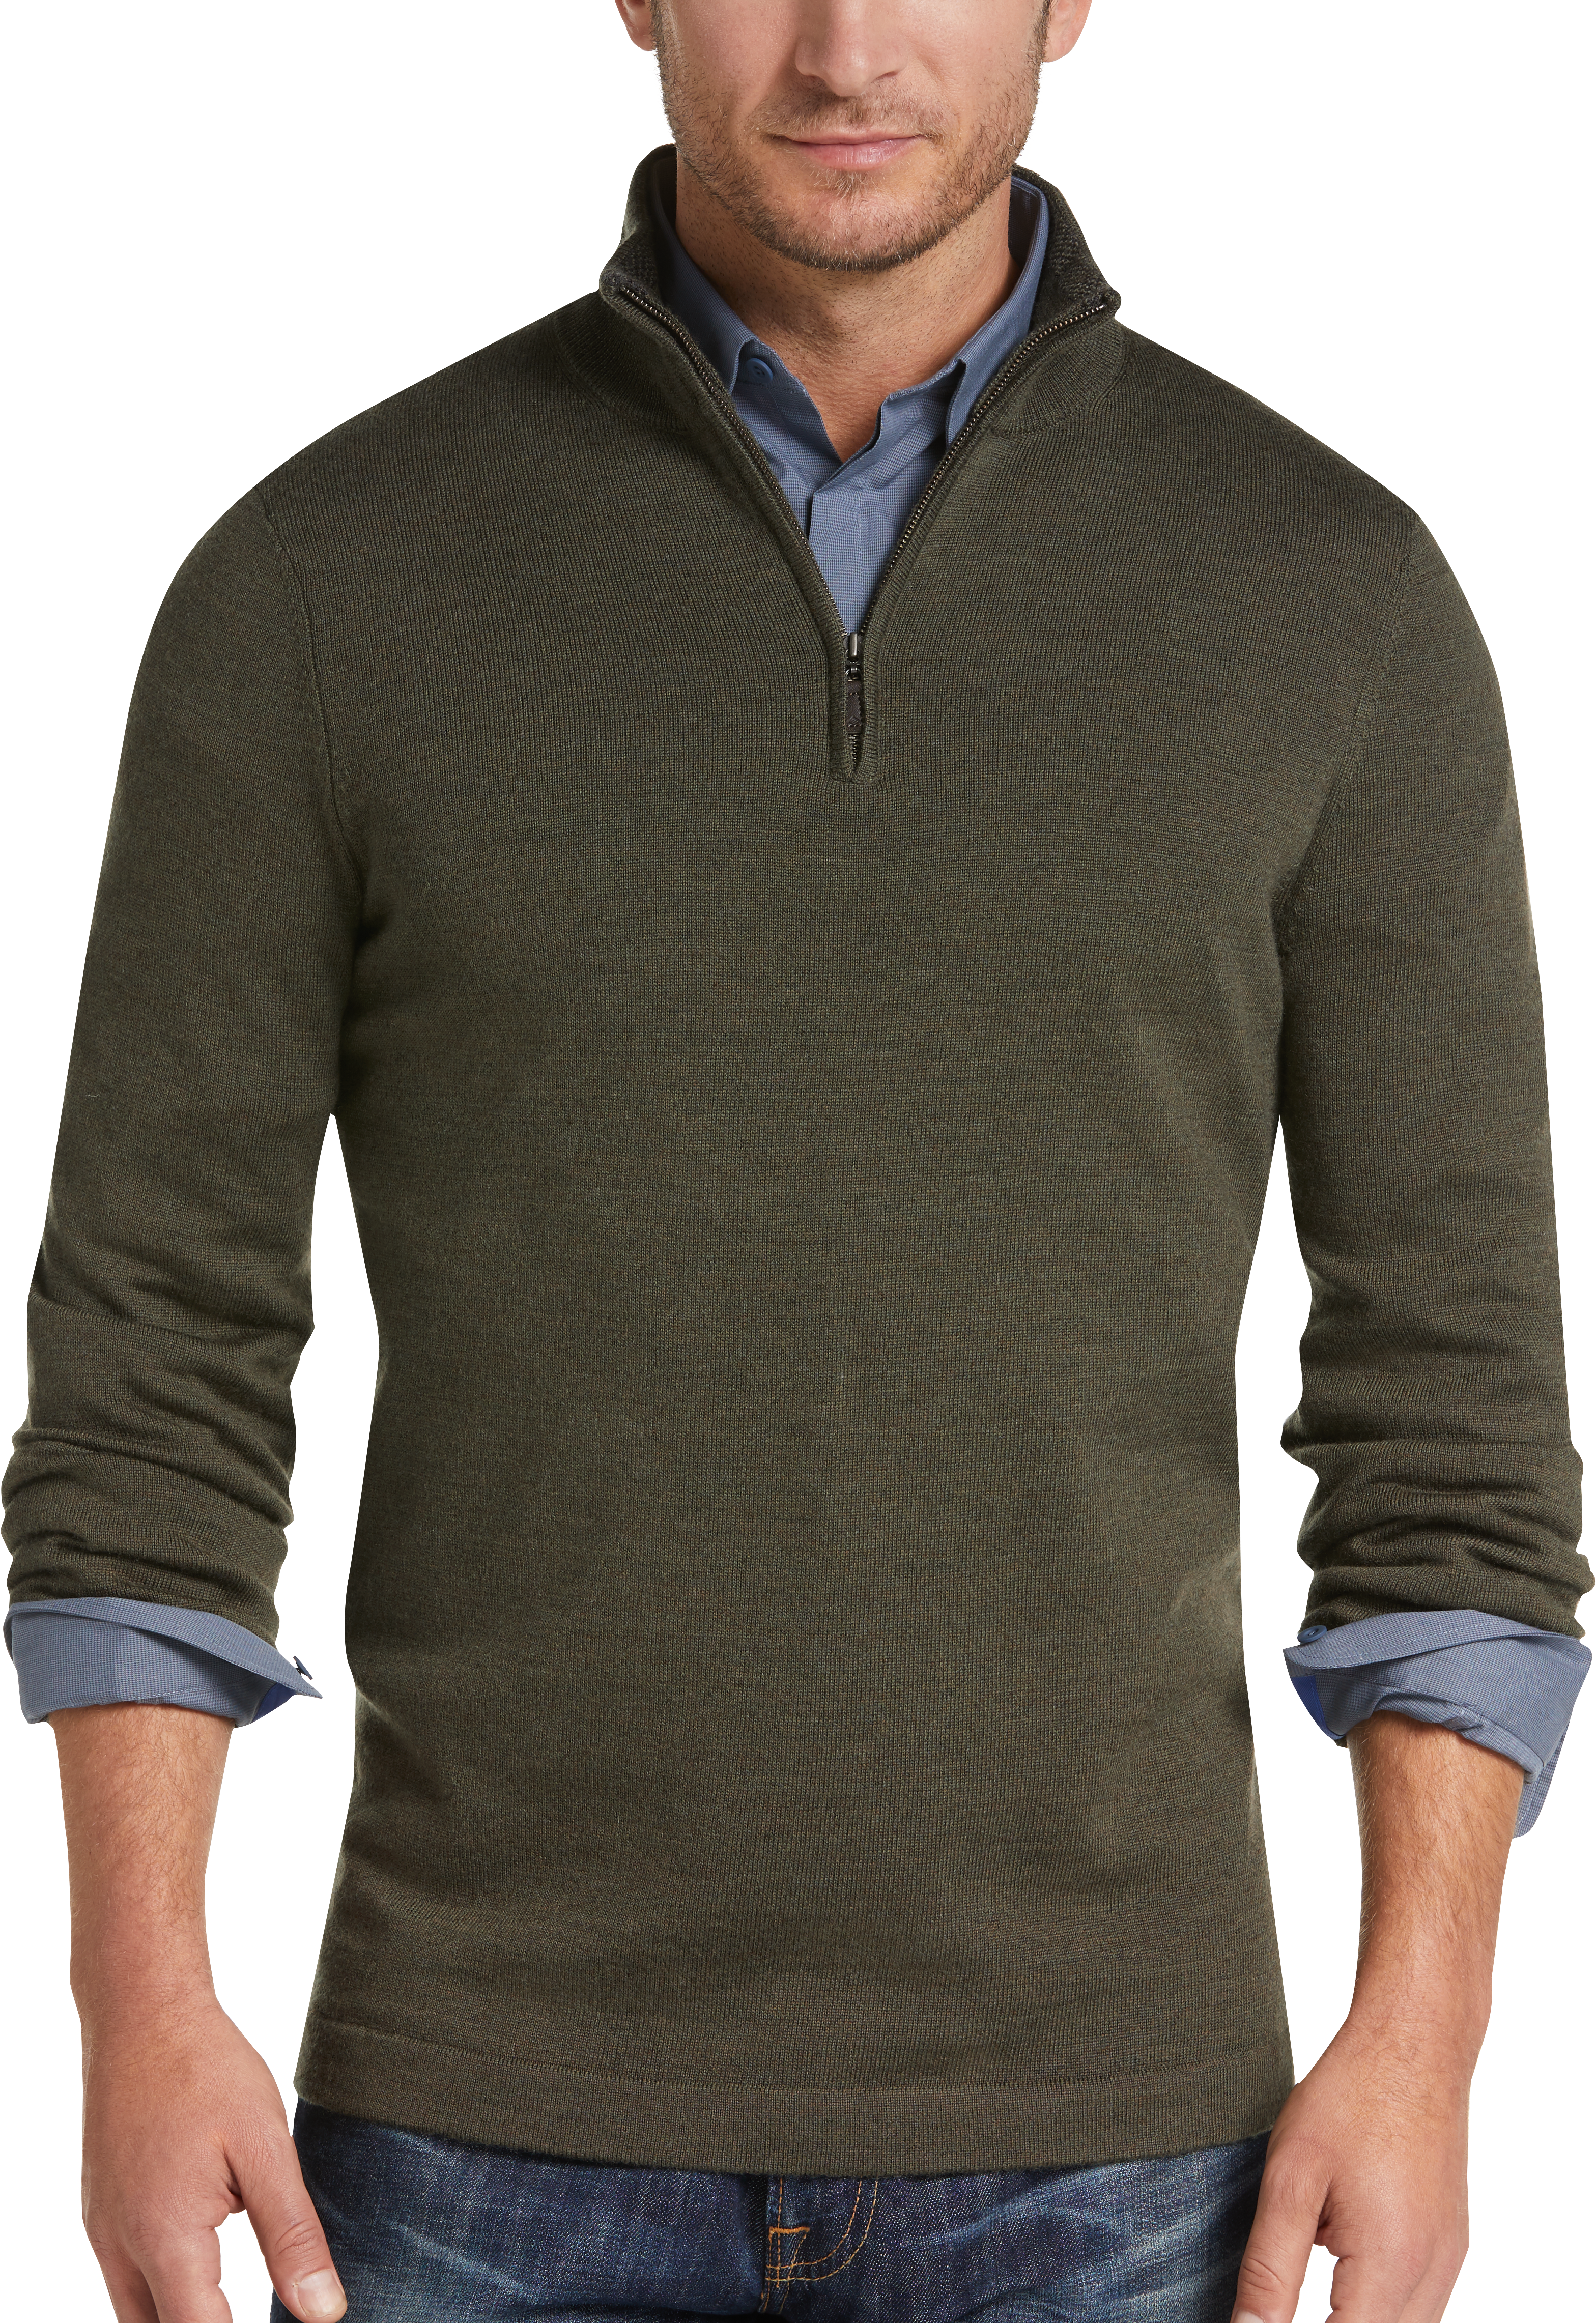 mock neck sweater with zipper